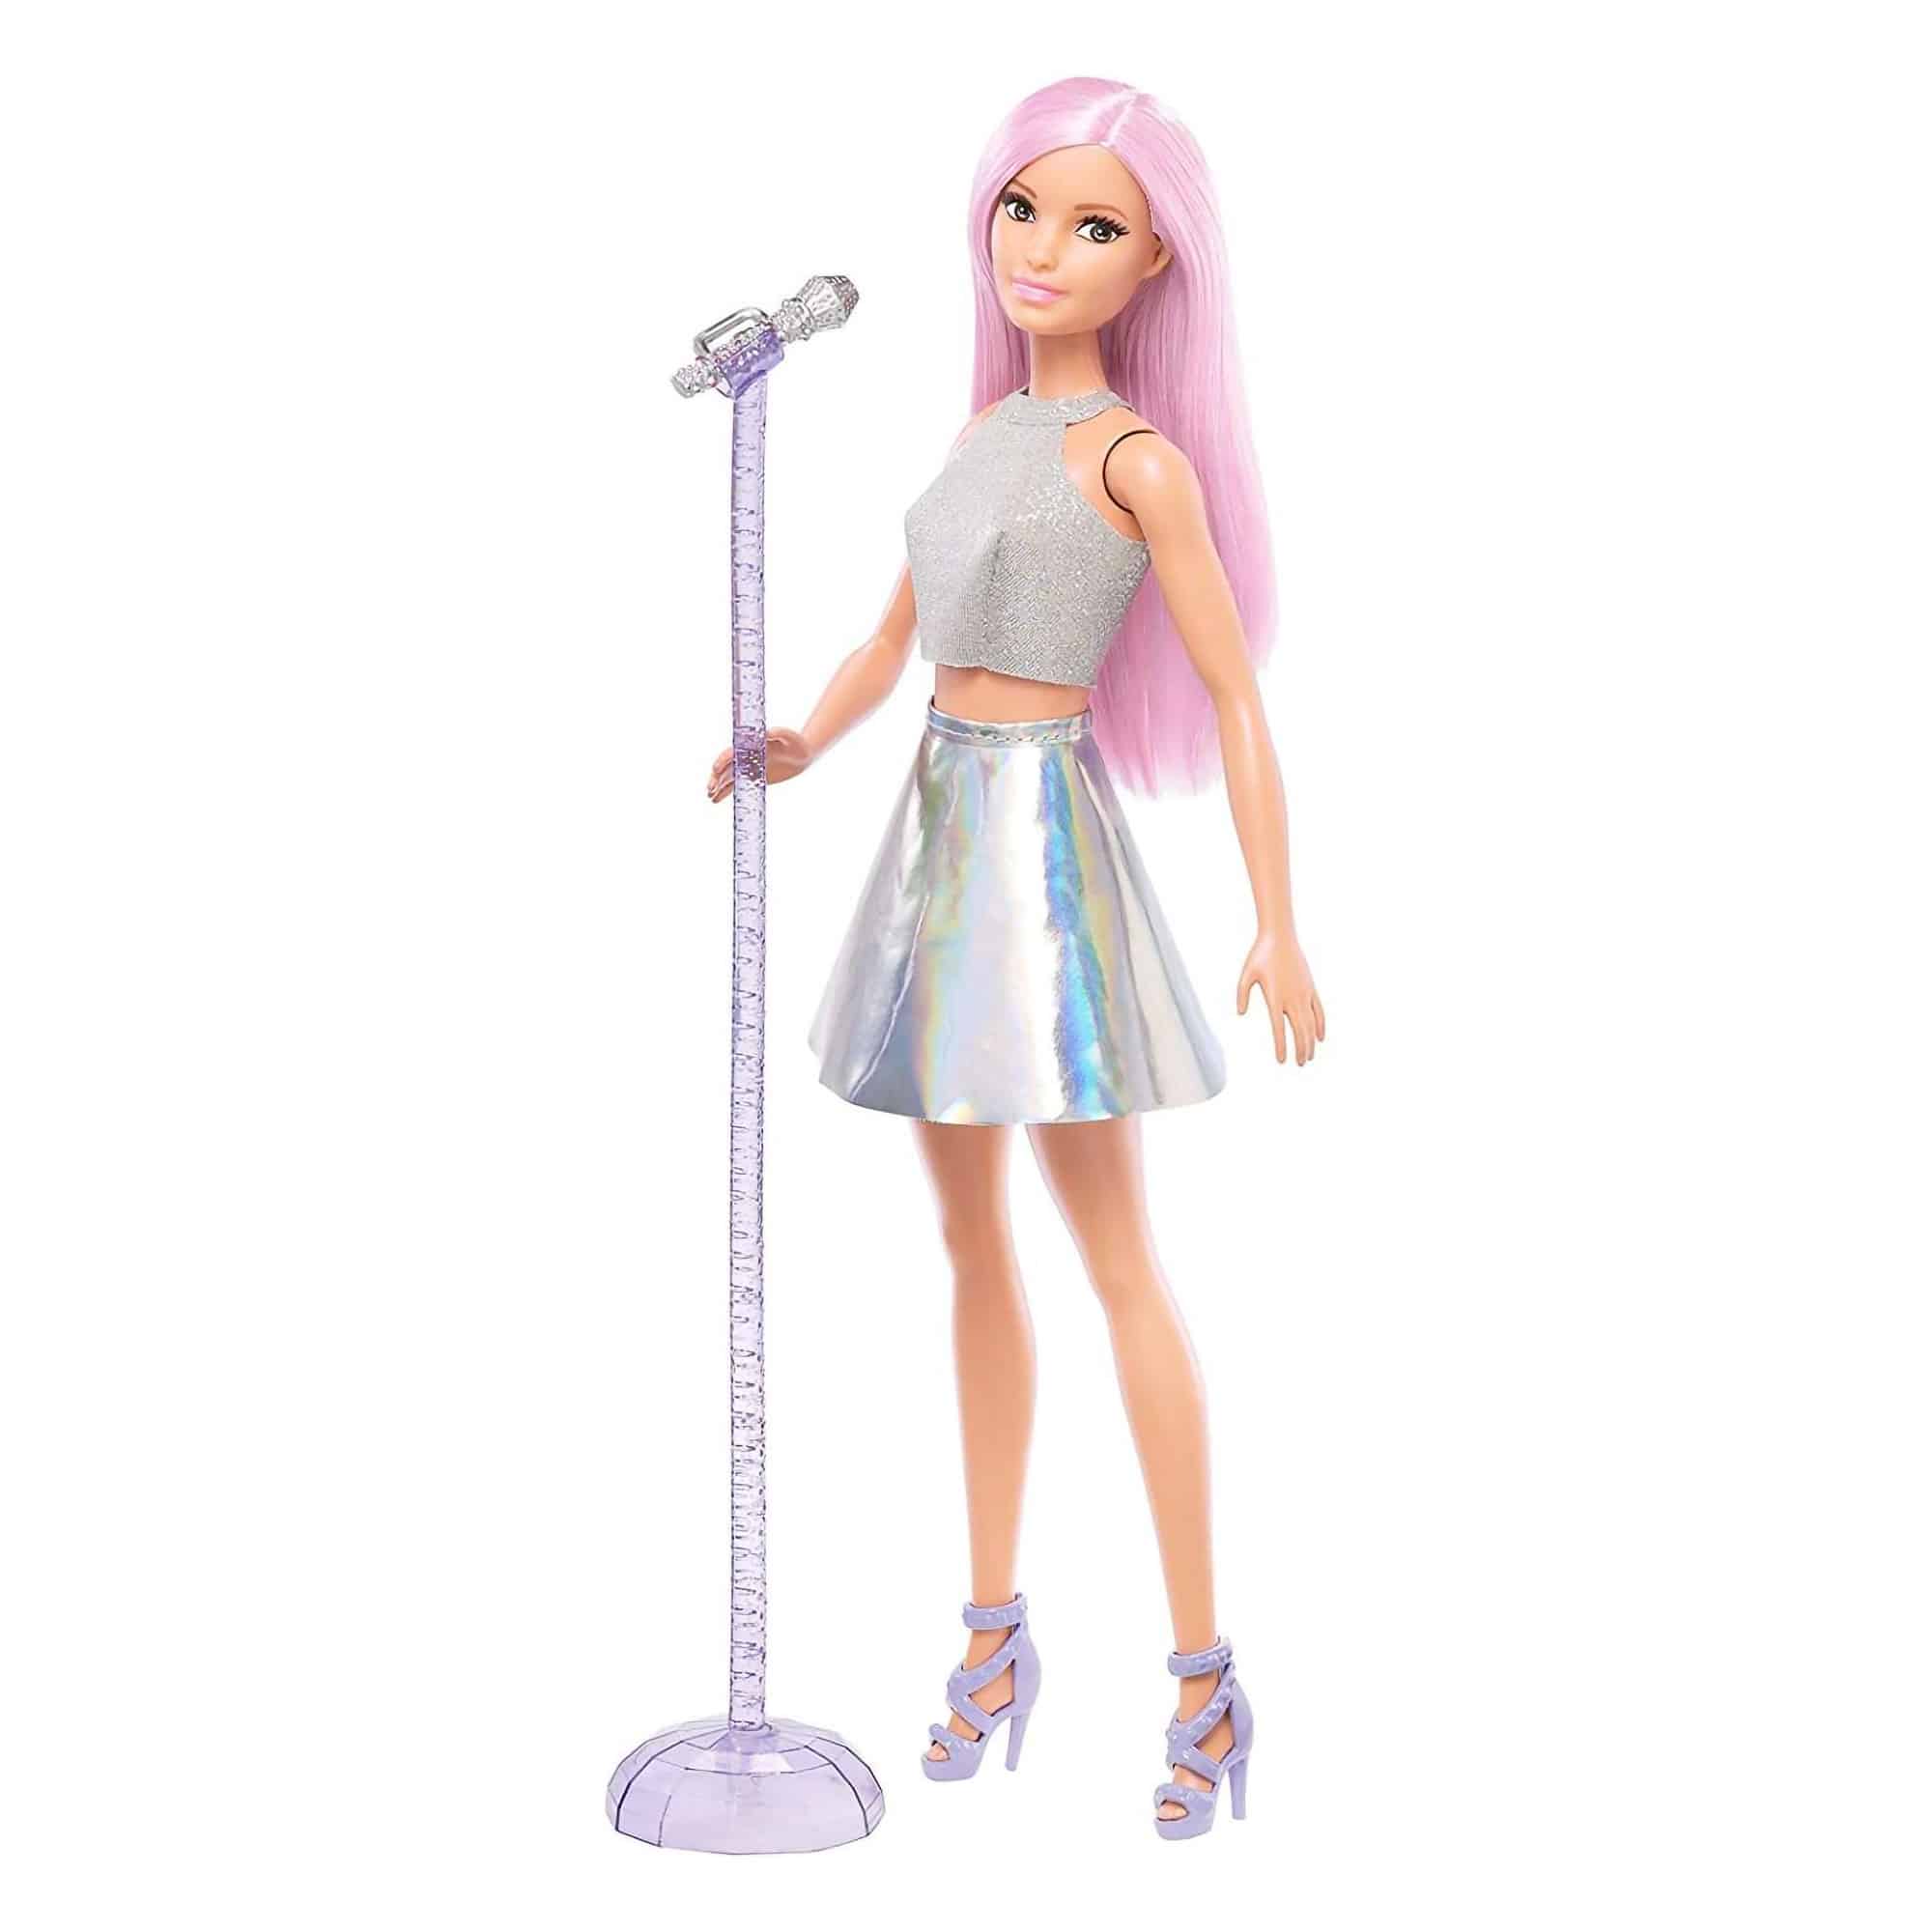 Barbie - You Can Be Anything - Pop Star Doll